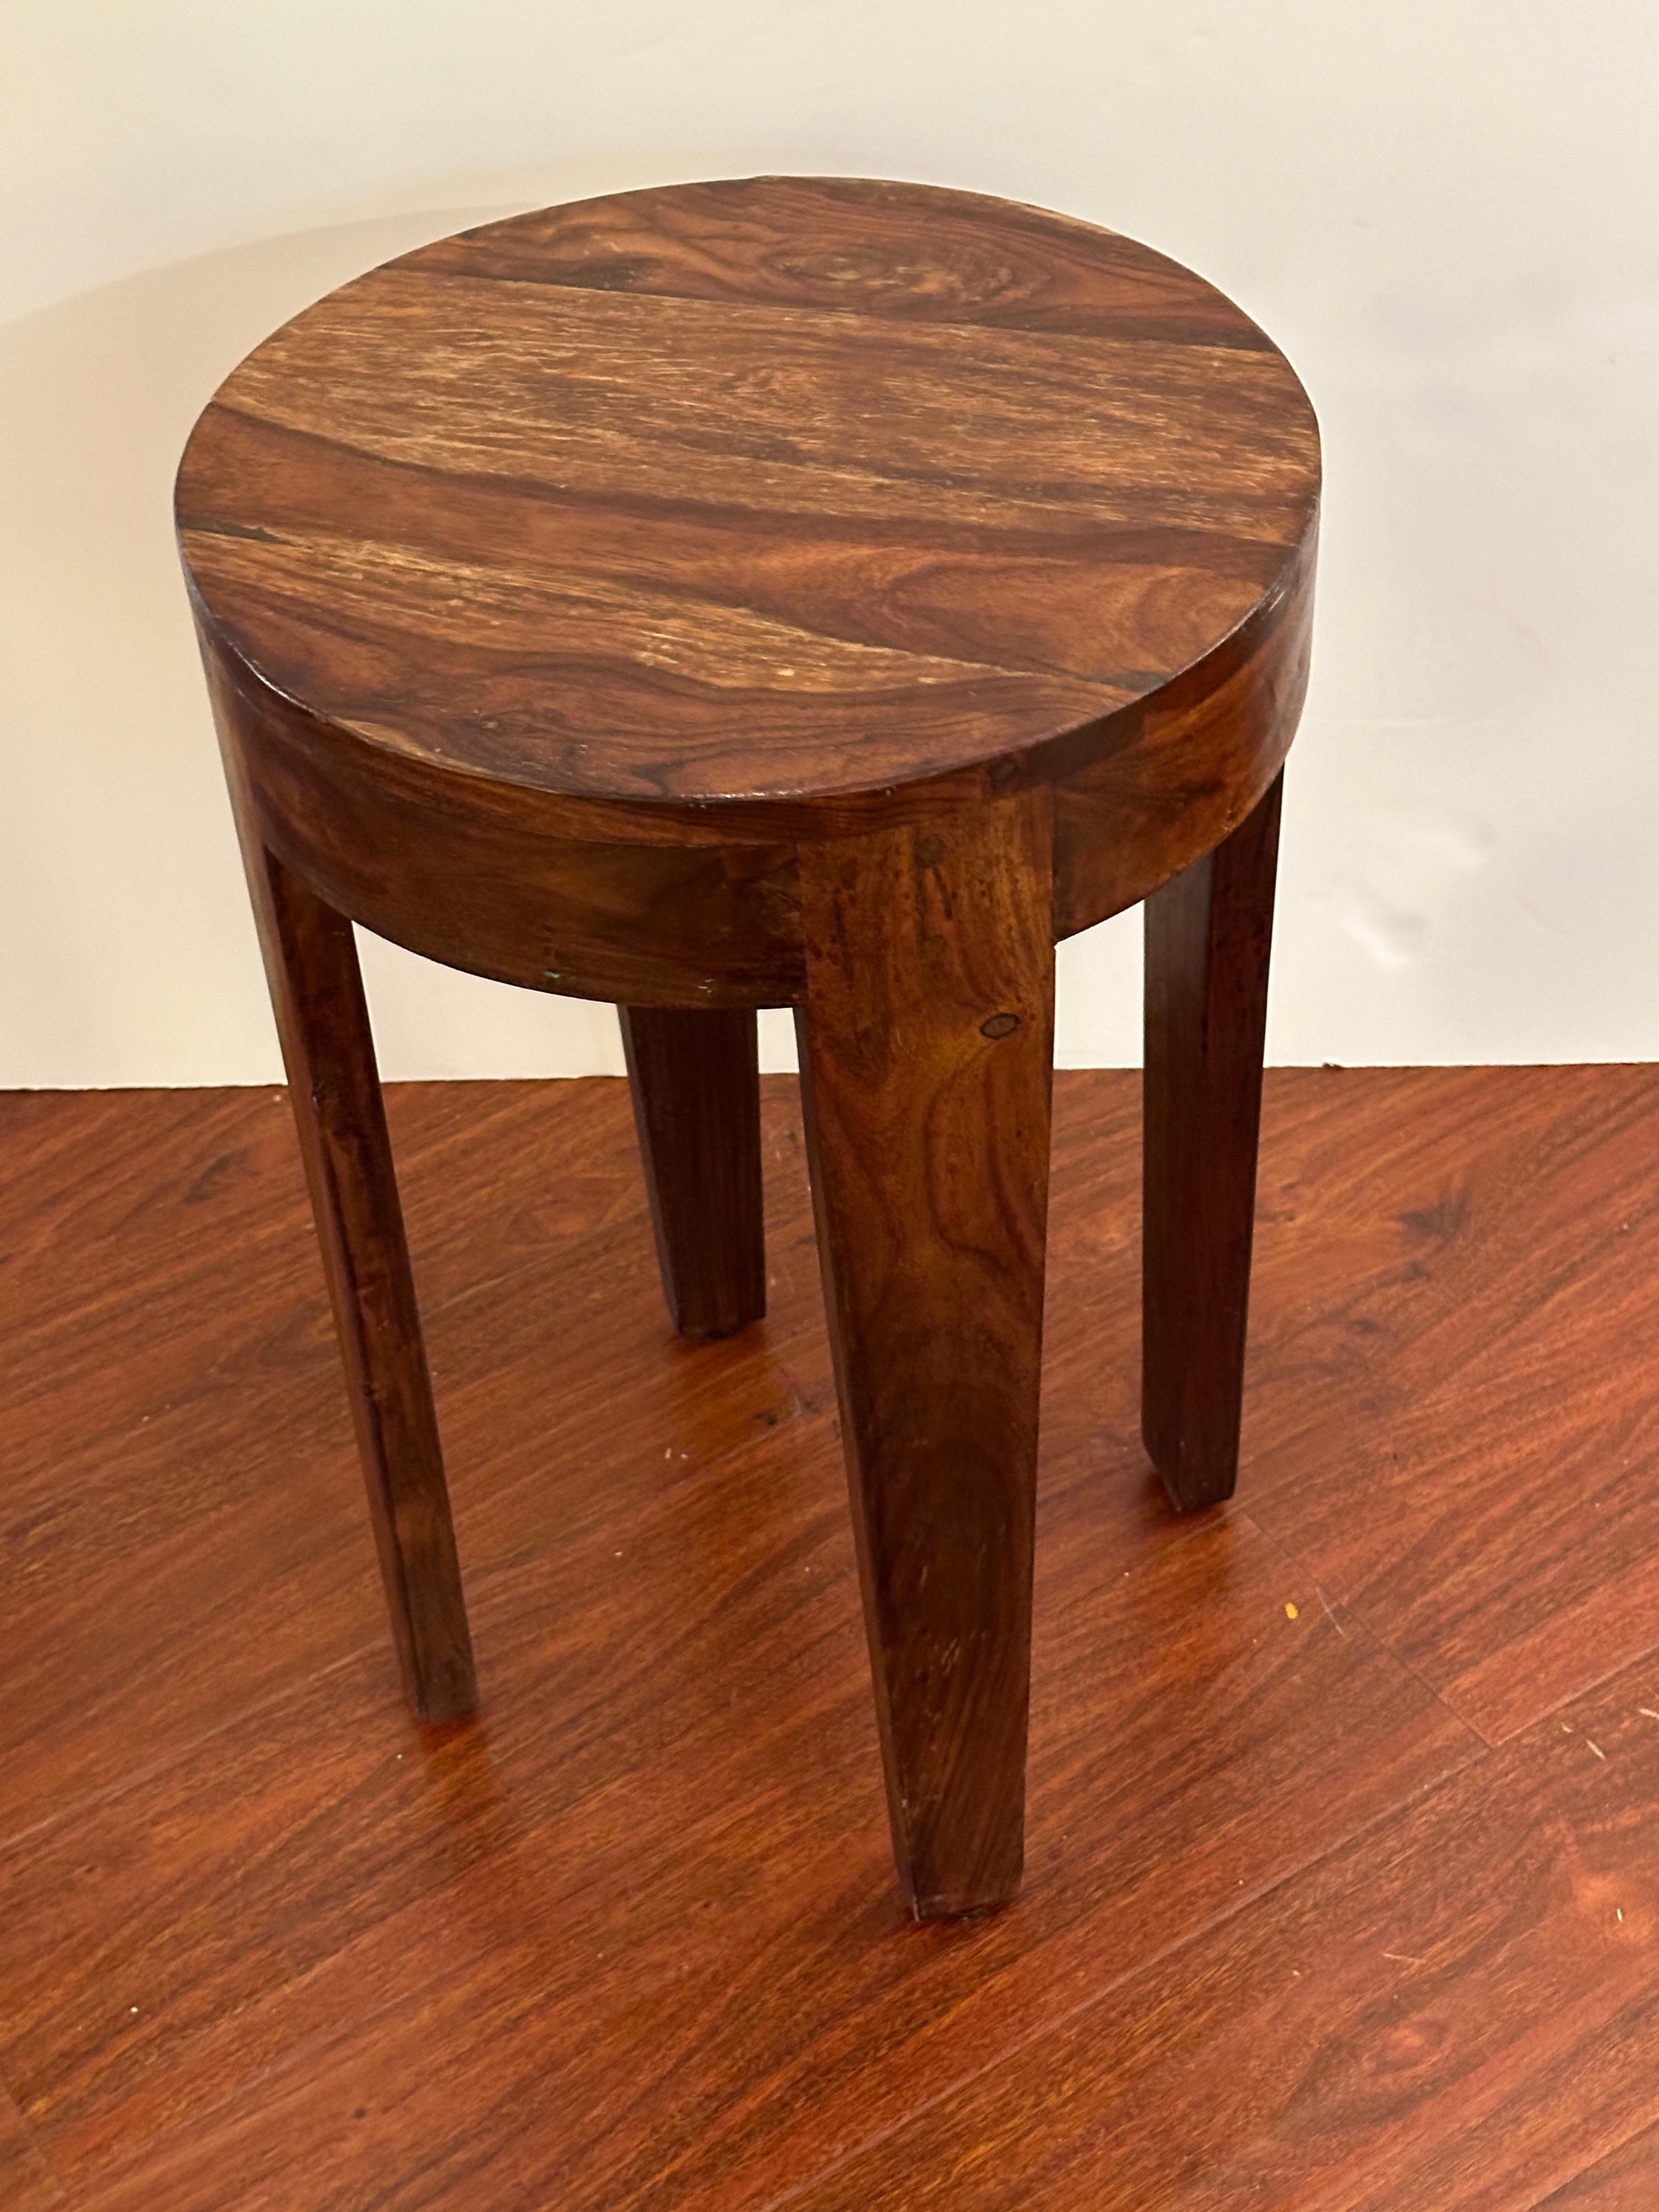 This little Gueridon is made of a beautiful flamed acacia and dated by the maker with pencil 4/28/60 underneath.
It is very sturdy and can be a side table or a pedestal for a heavy sculpture.